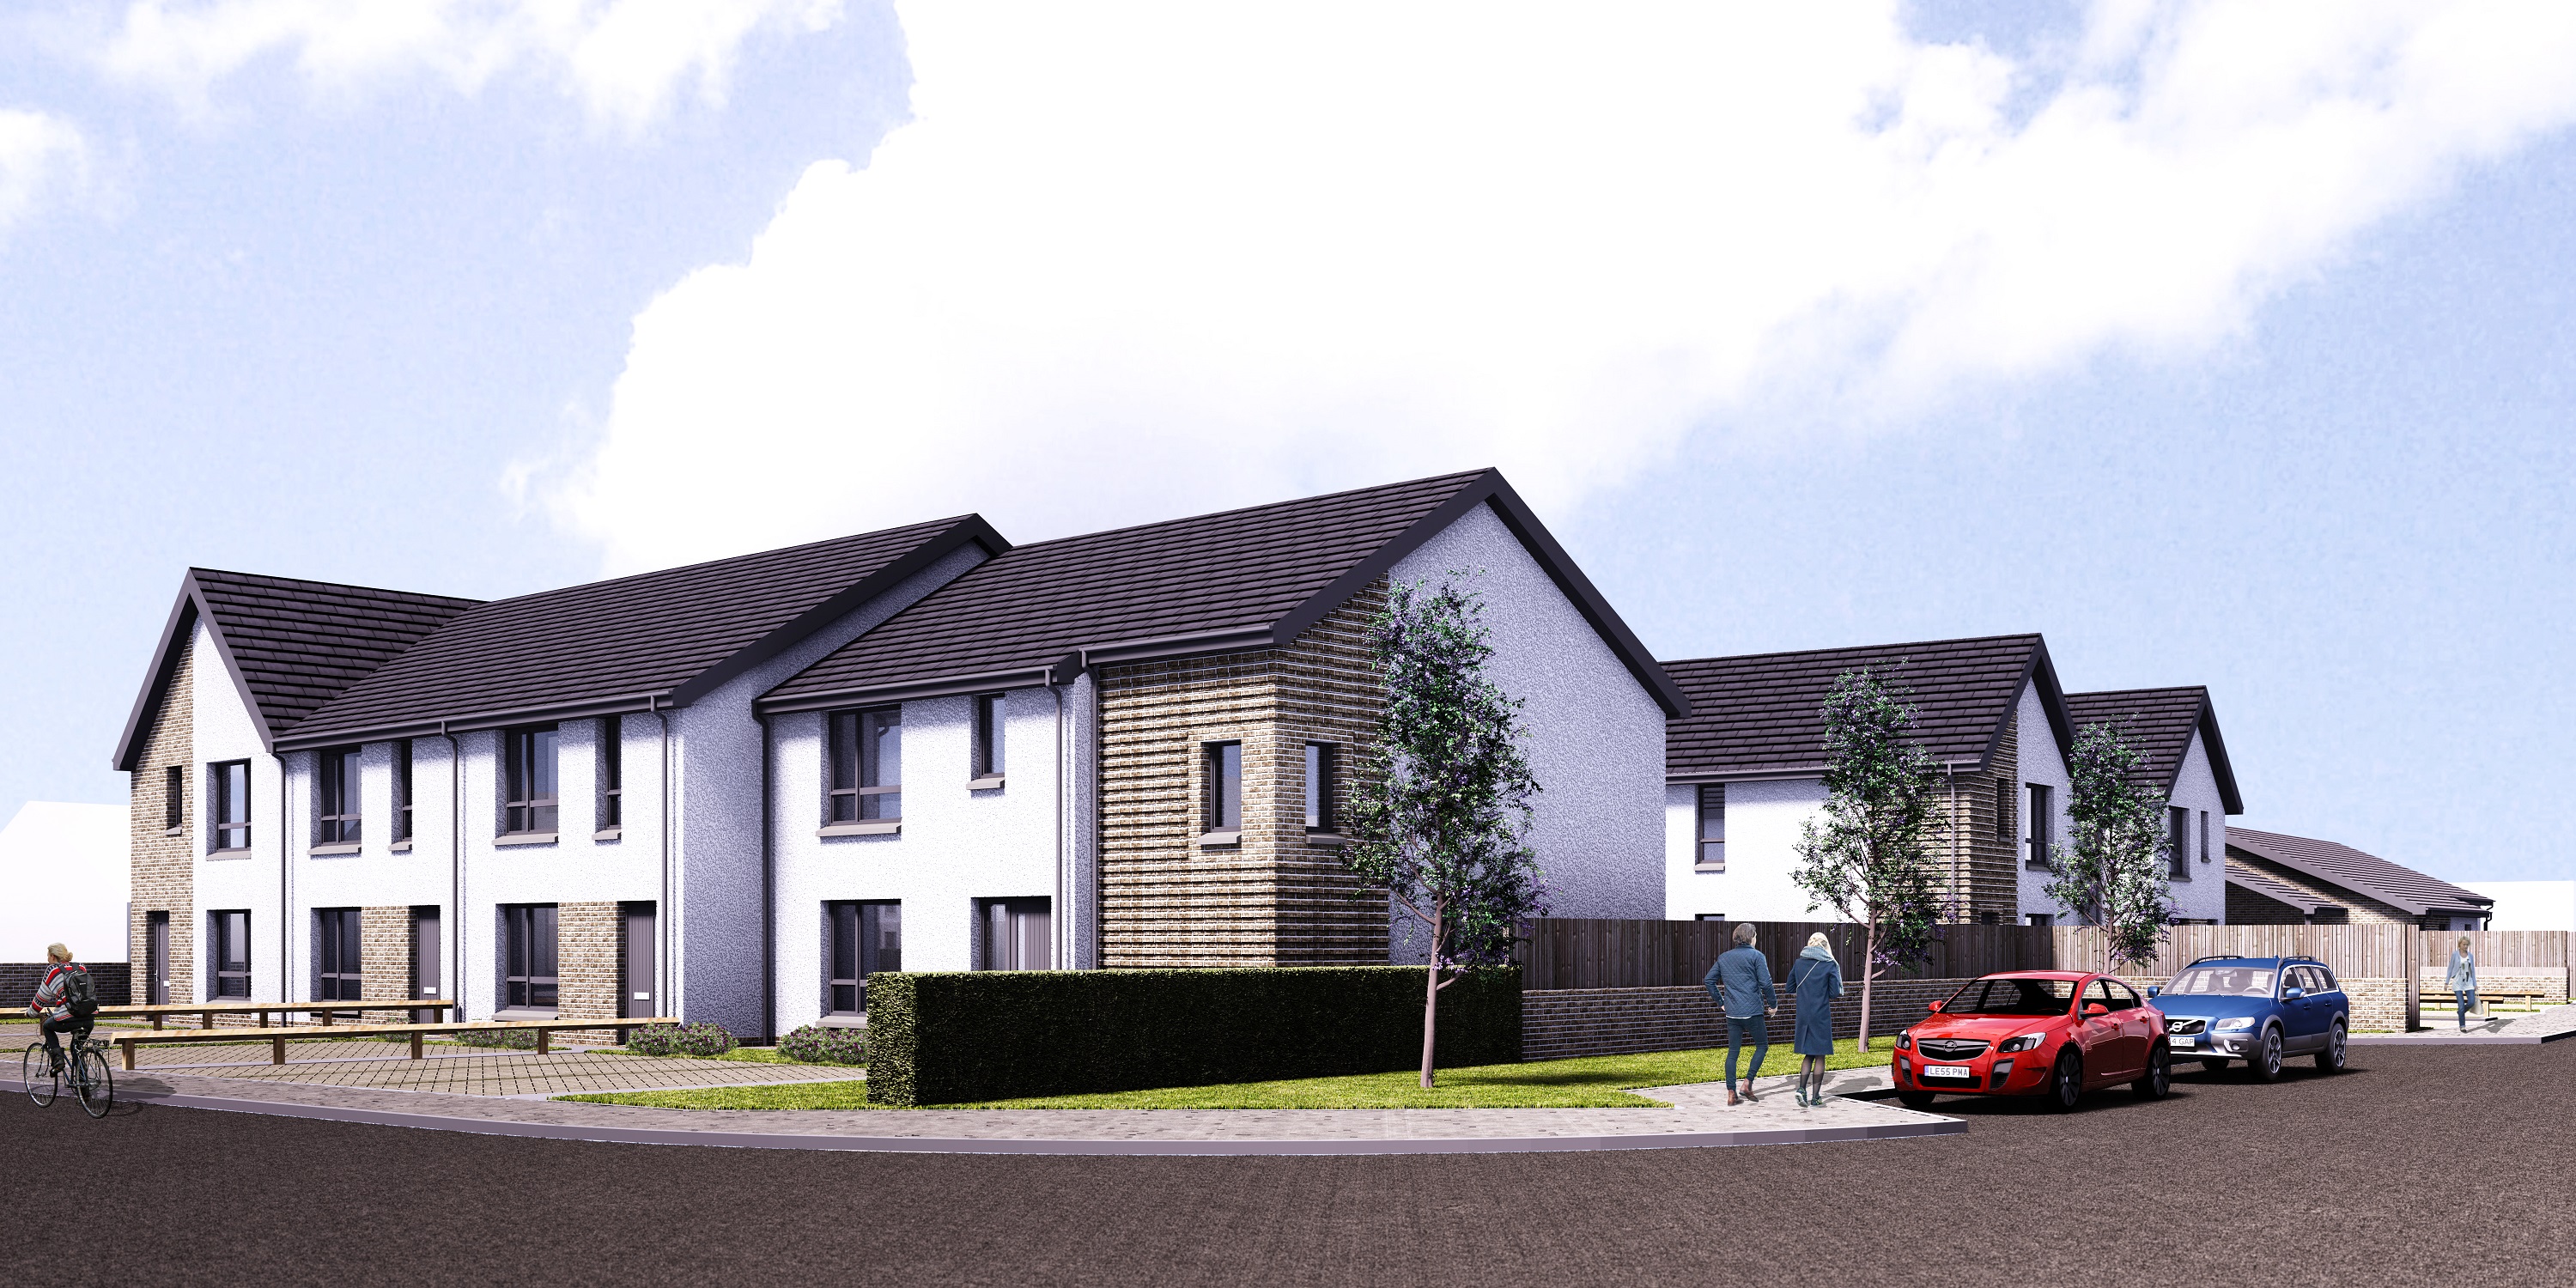 Work starts on two East Ayrshire Council developments